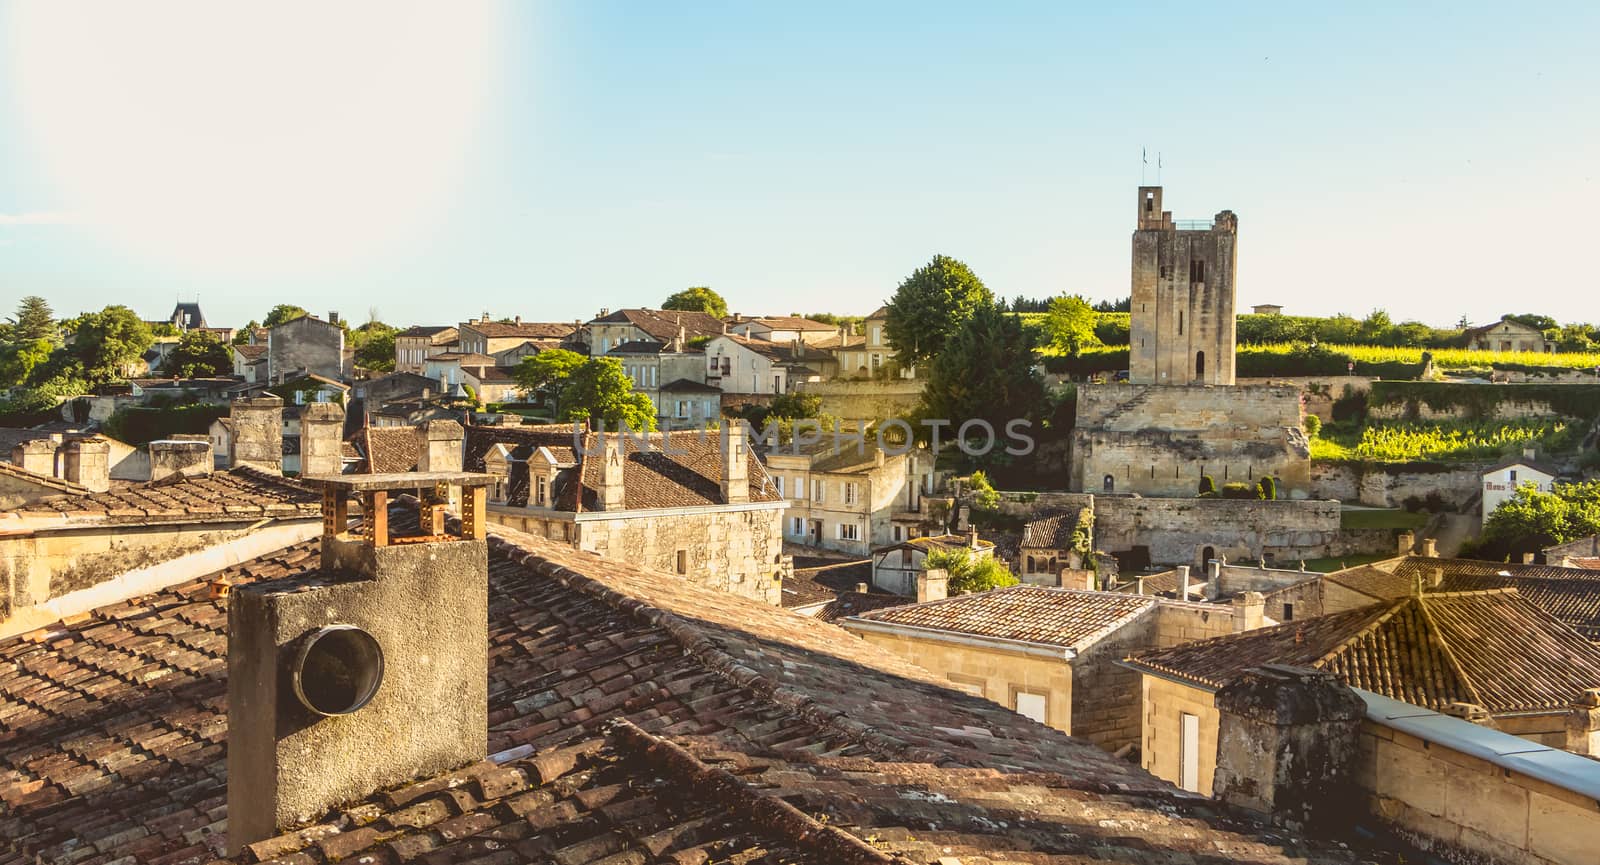 SAINT EMILION near BORDEAUX, FRANCE - May 25, 2017 : aerial view of the city whose specialty is fine wine production on a spring day